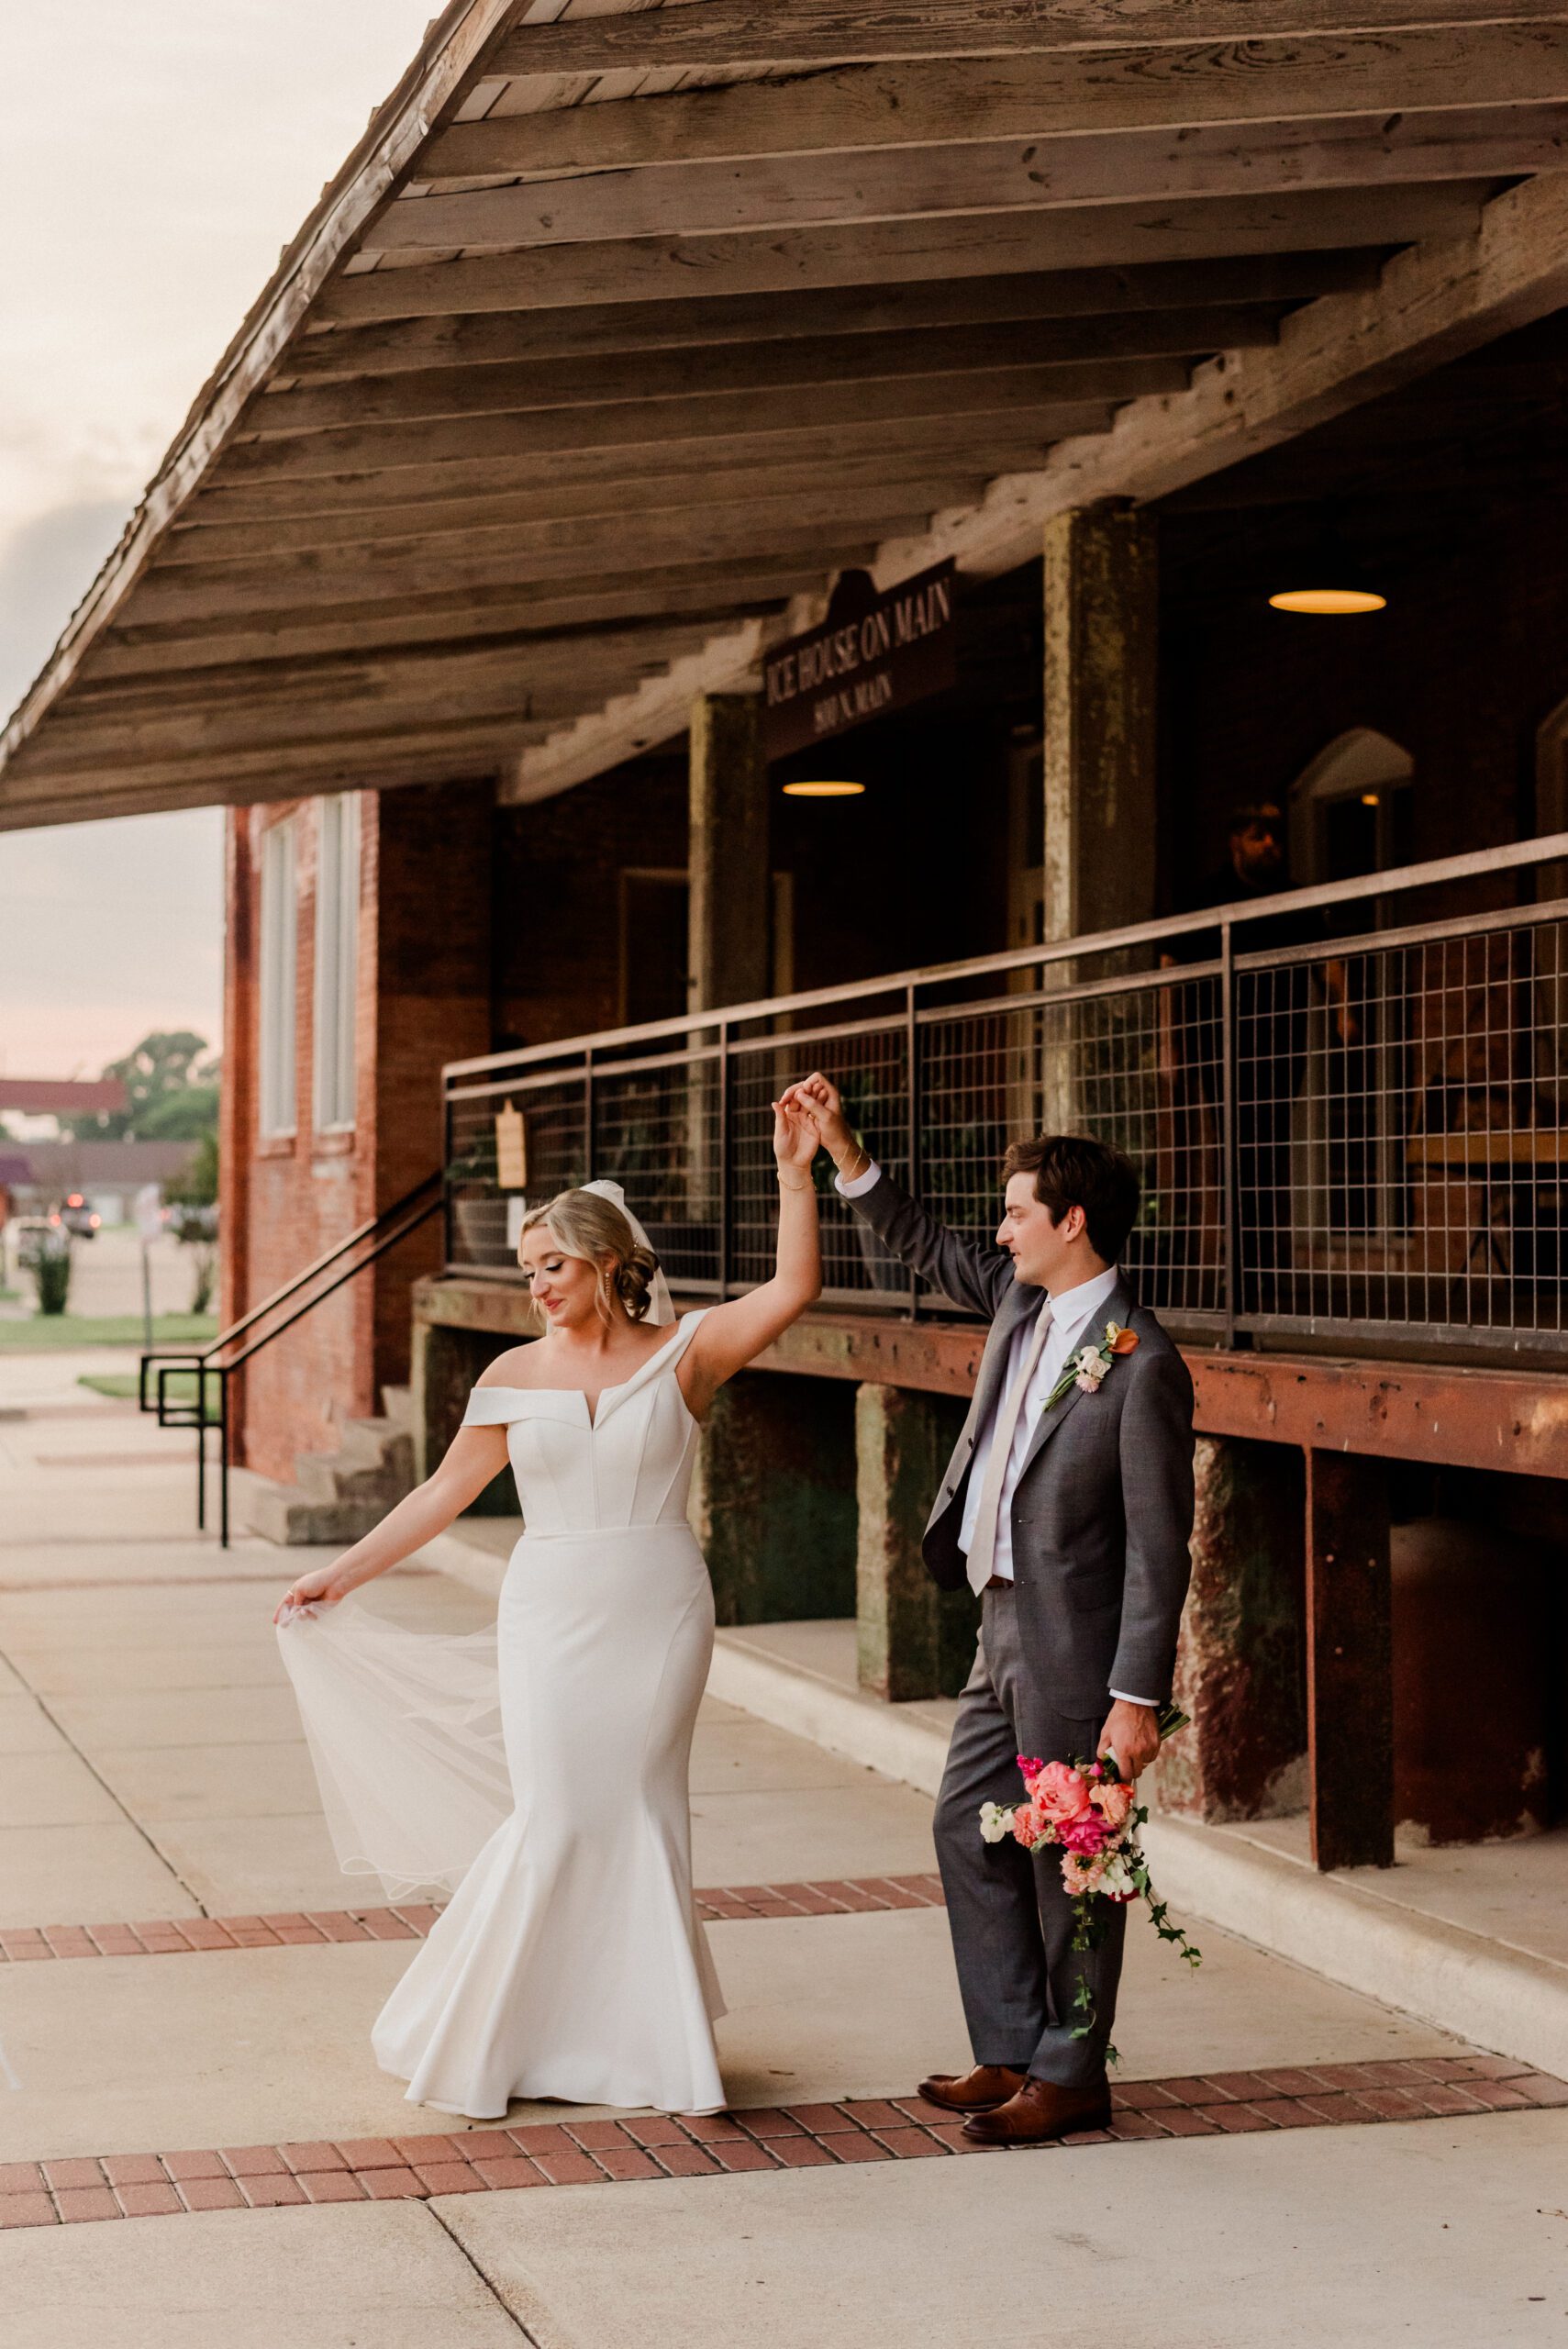 Haley and Jacob's Wedding at the Ice House on Main in Bryan, Texas with Rachel Driskell Photography